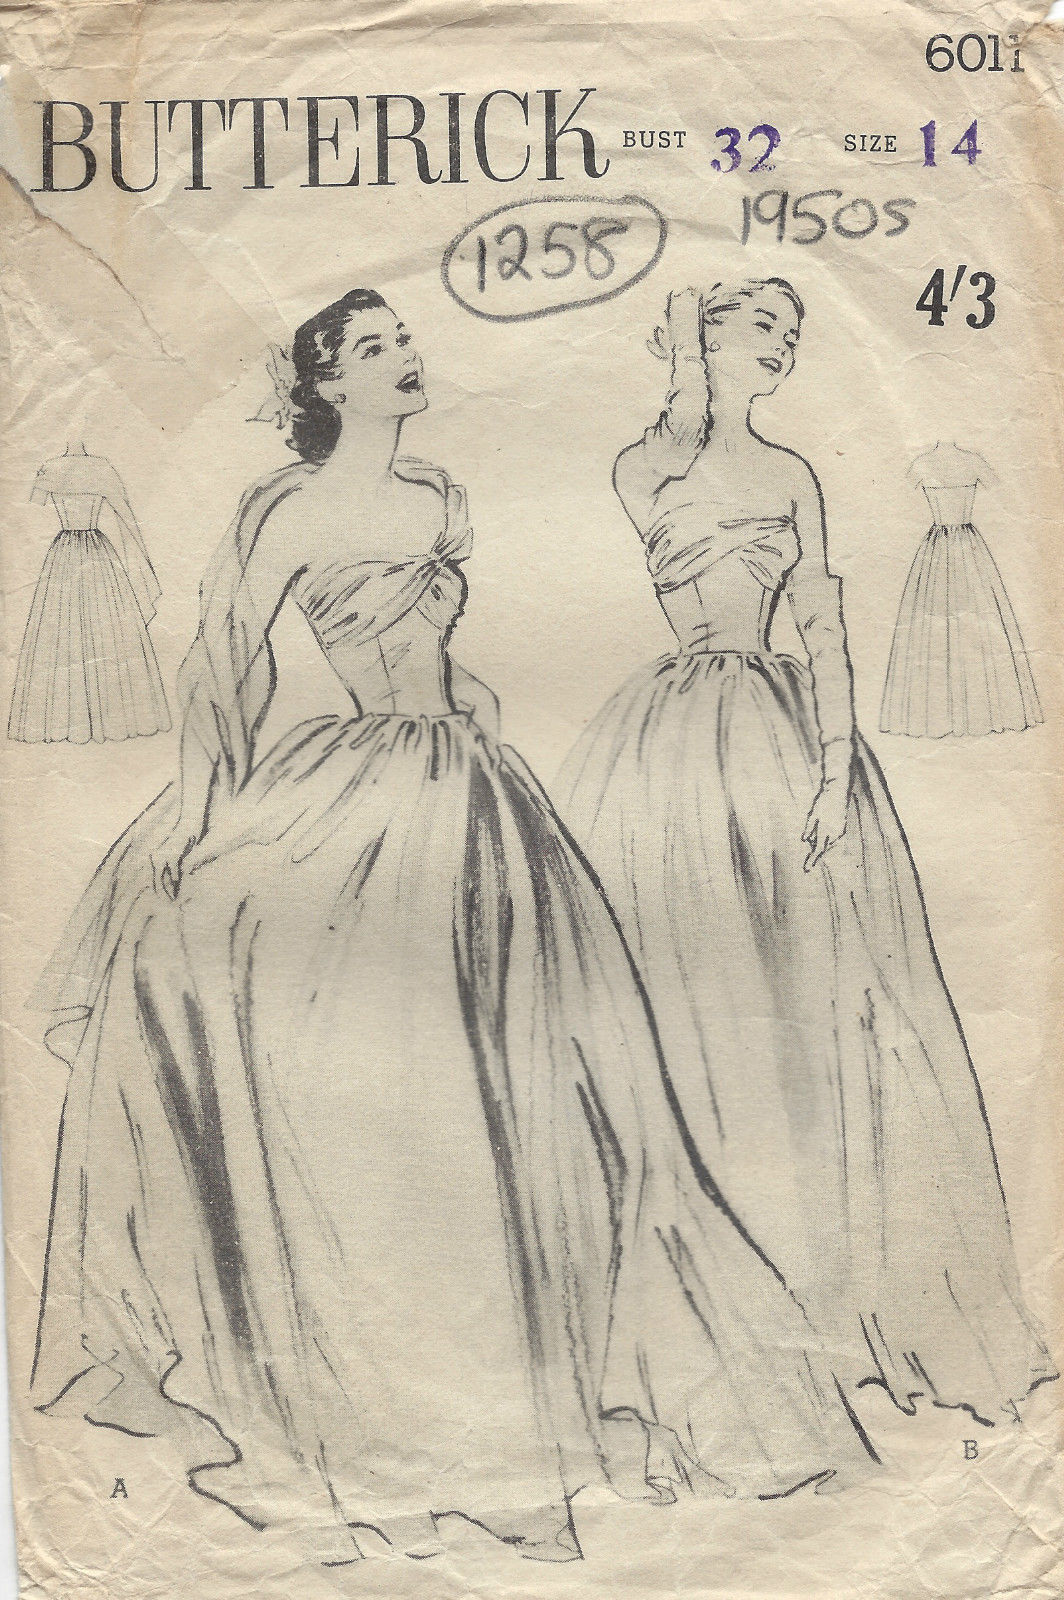 1950s GLAMOROUS Evening Dress or Gown Pattern VOGUE Special Design 4606  Very Full Skirt Shirred Bodice Just Beautiful Style Bust 30 Vintage Sewing  Pattern